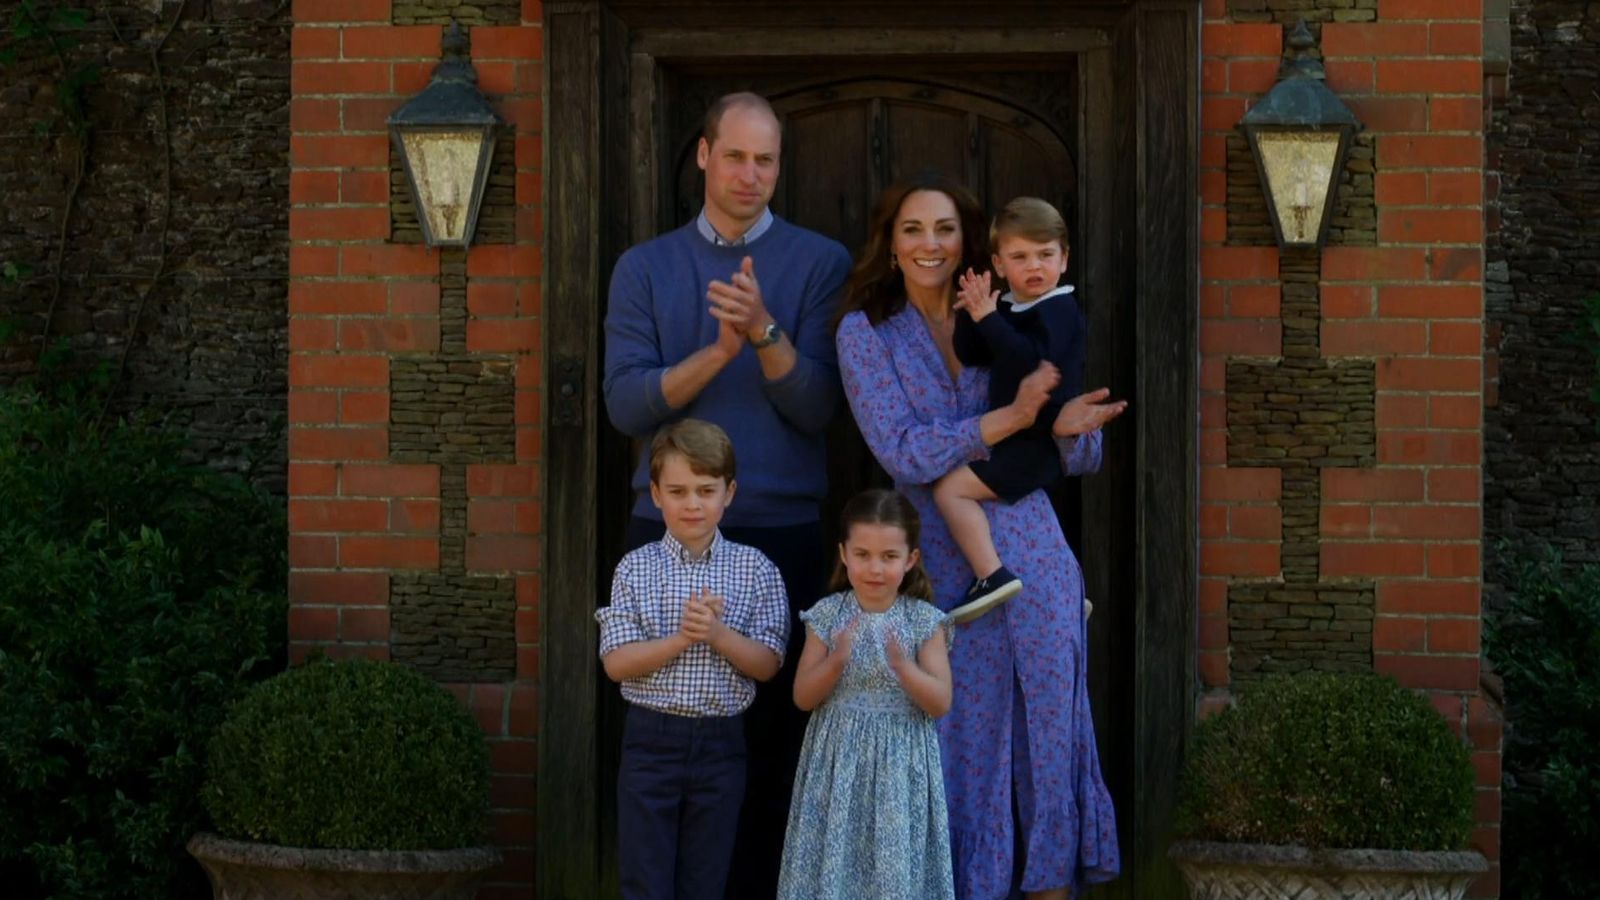 Coronavirus William Kate And Family Wear Blue In Clap For Our Carers Tribute Uk News Sky News